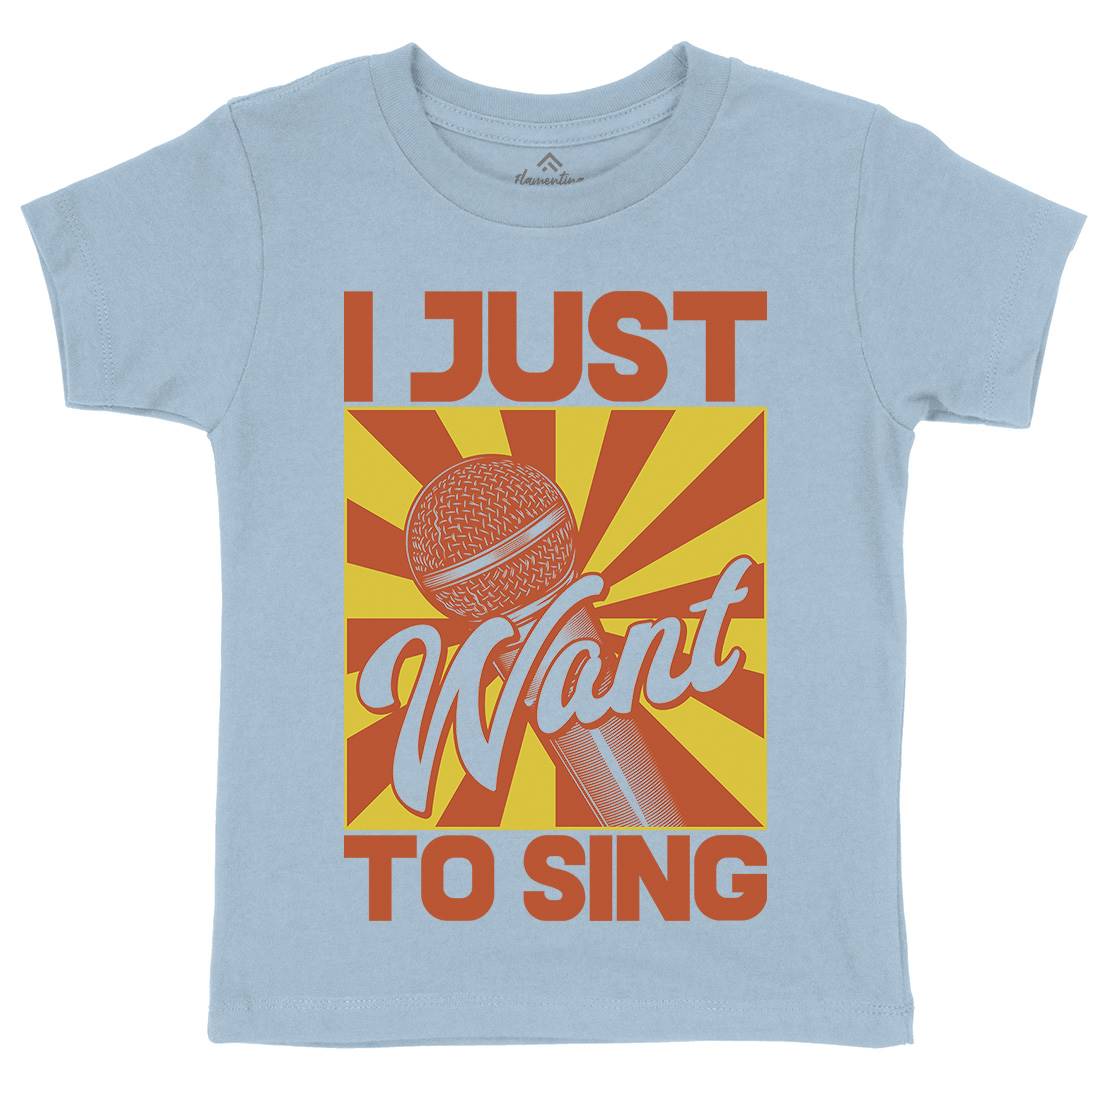 Want To Sing Kids Crew Neck T-Shirt Music C866